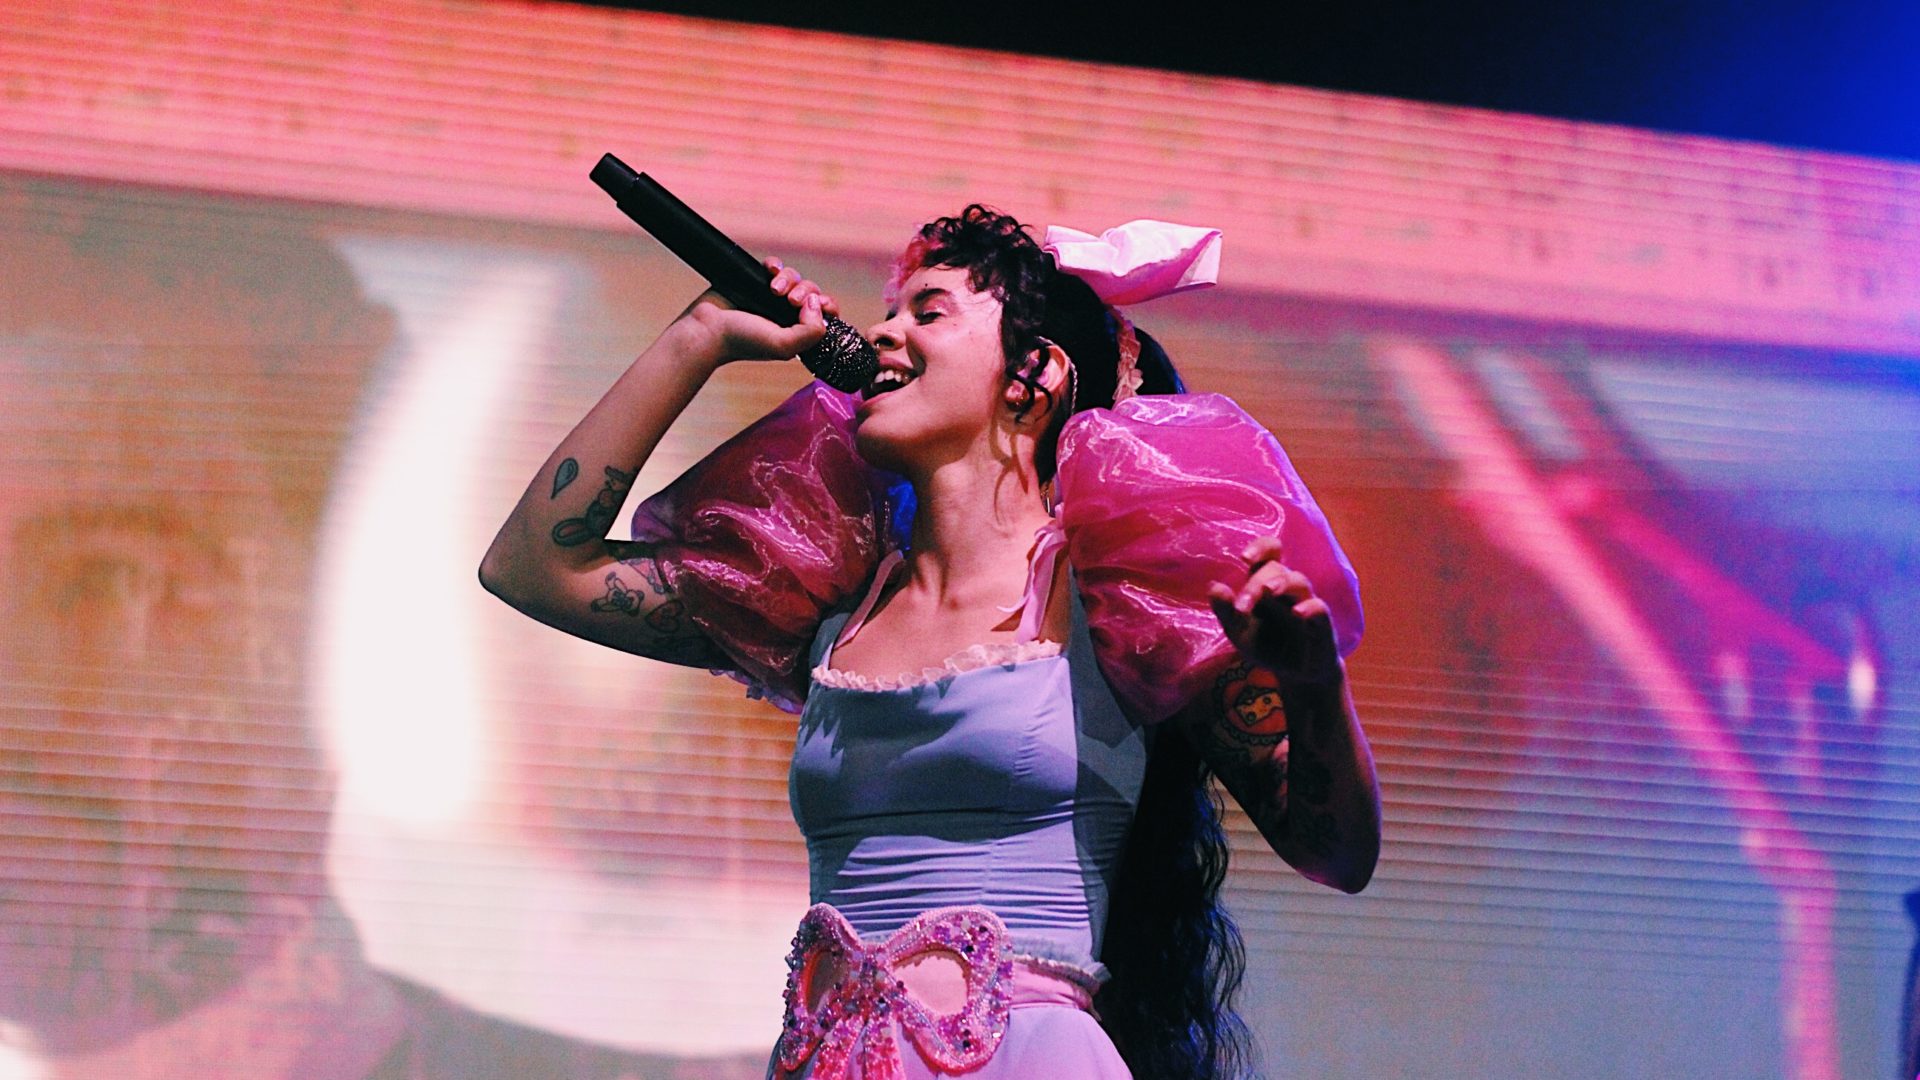 Kali Uchis performs at the Fader Fort during the 2018 SXSW Conference and Festivals in Austin, Texas. - Melanie Martinez